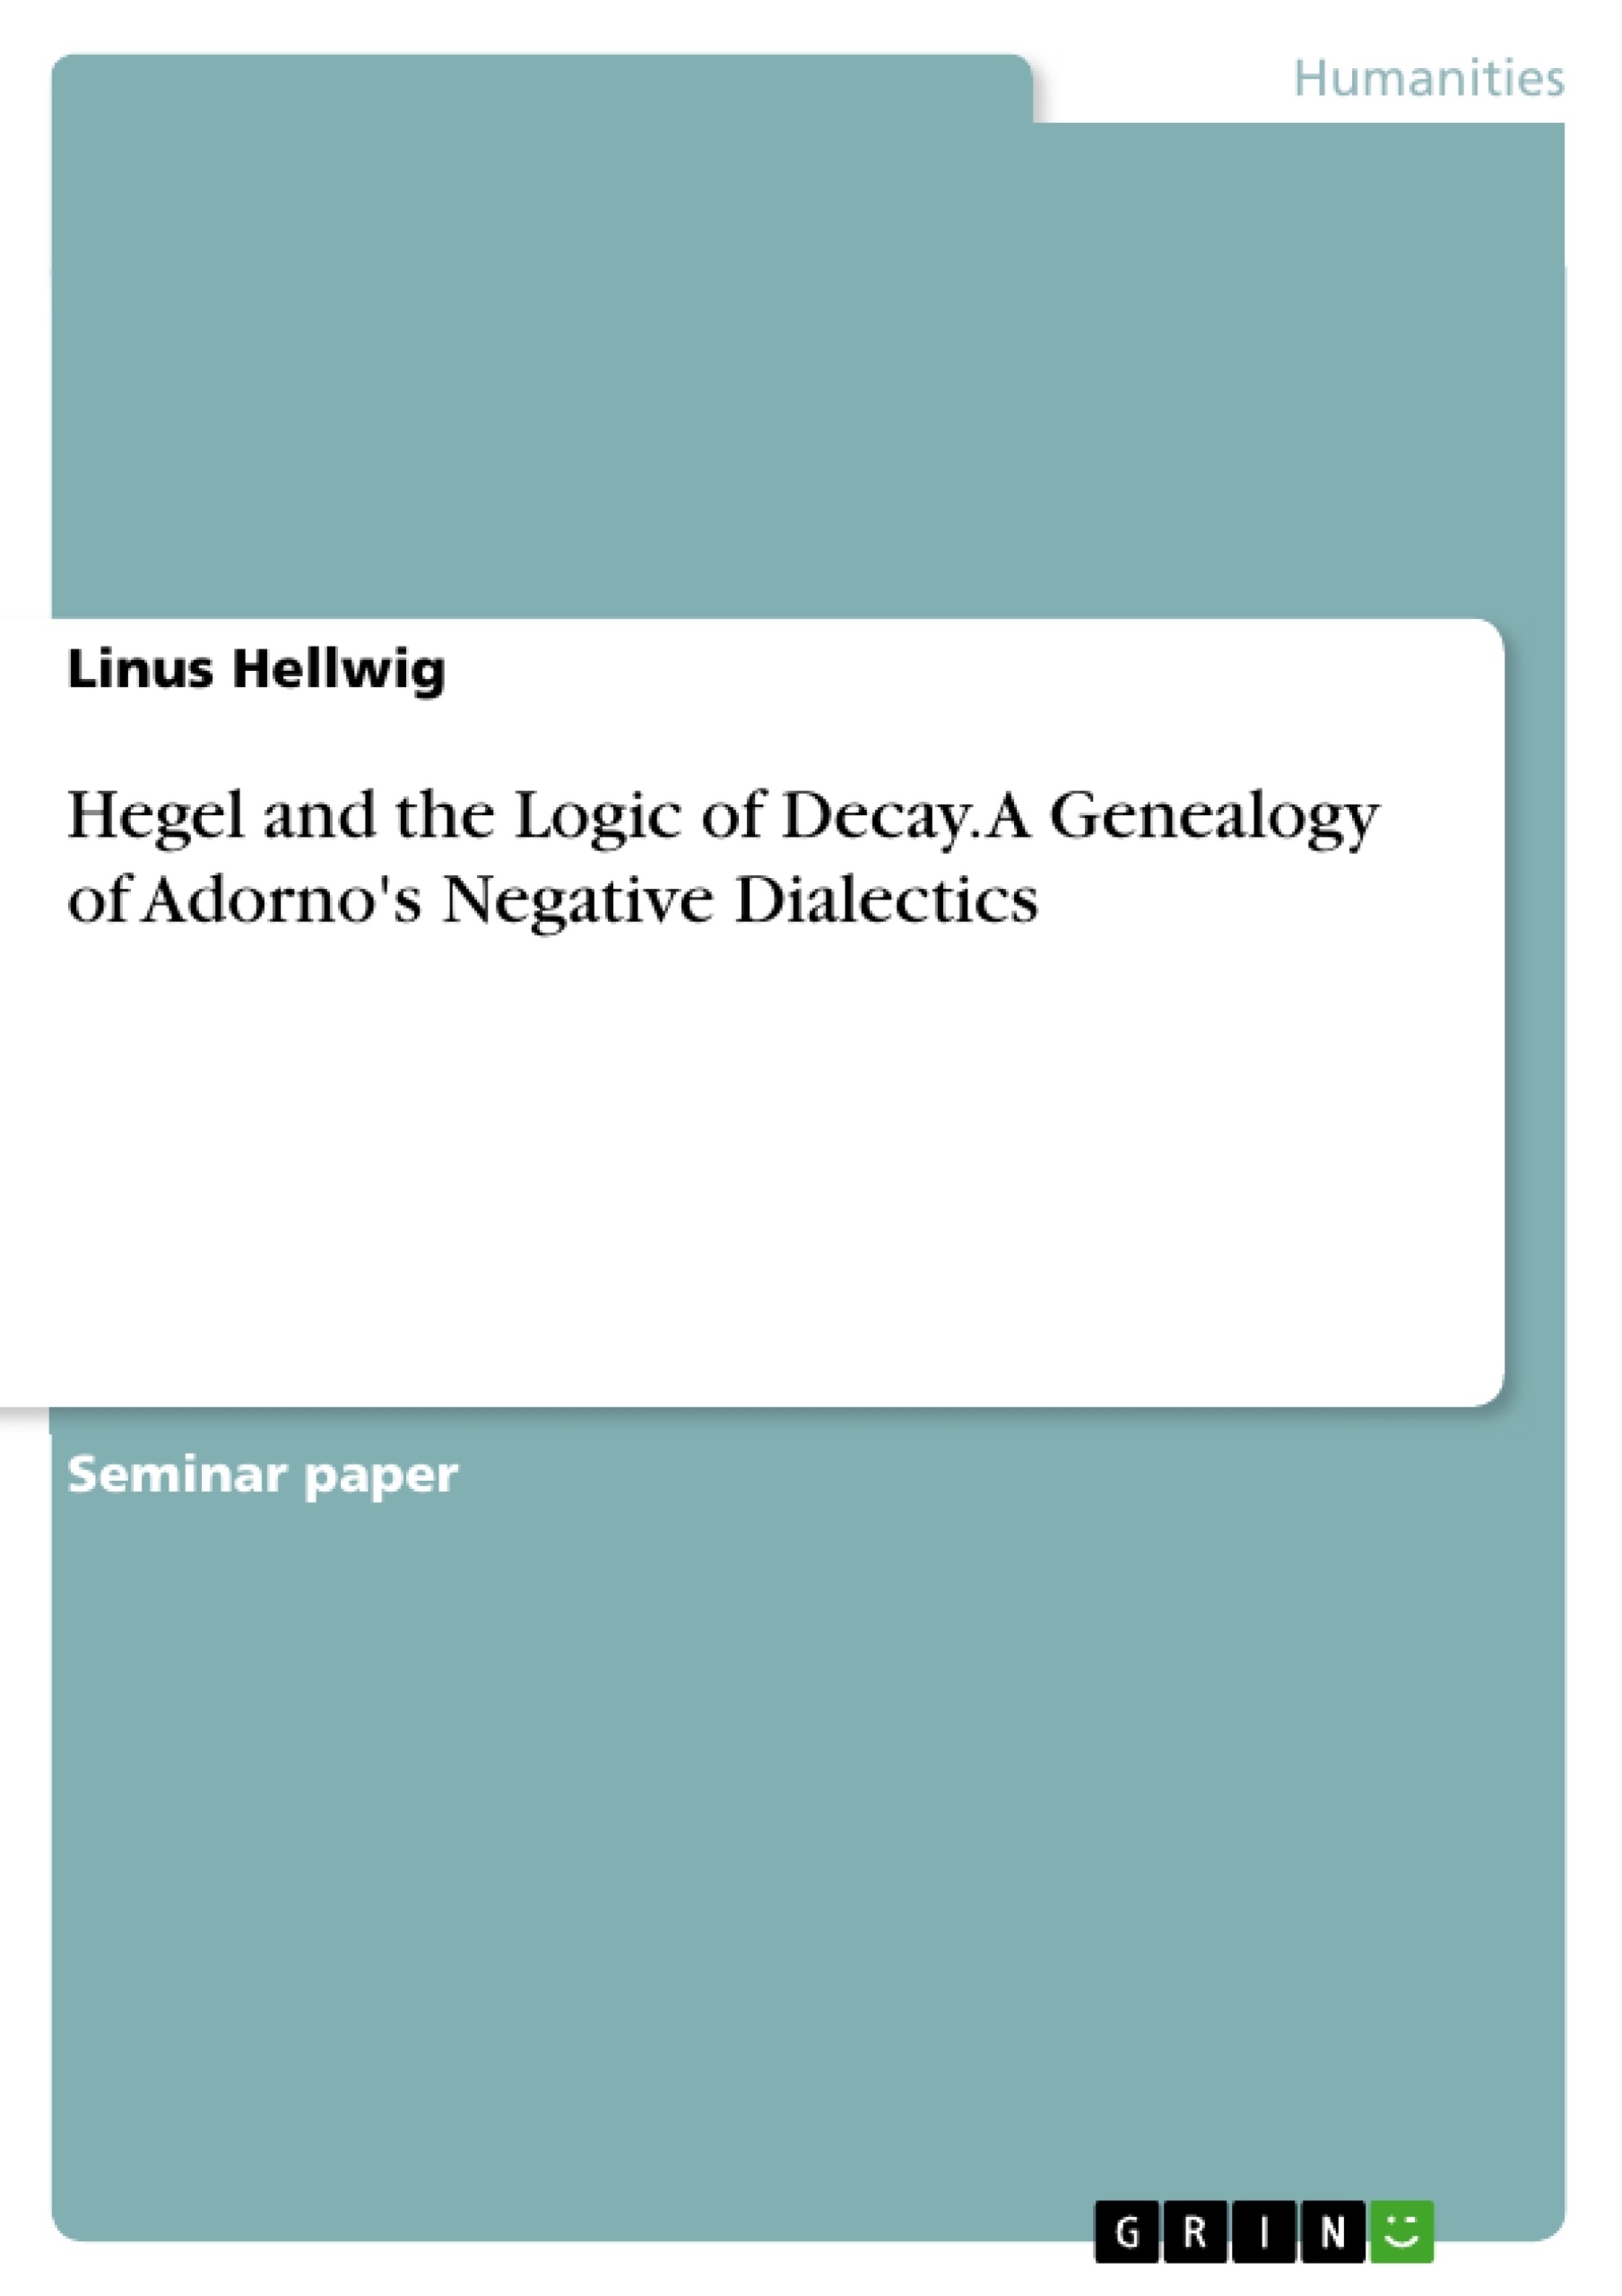 Title: Hegel and the Logic of Decay. A Genealogy of Adorno's Negative Dialectics